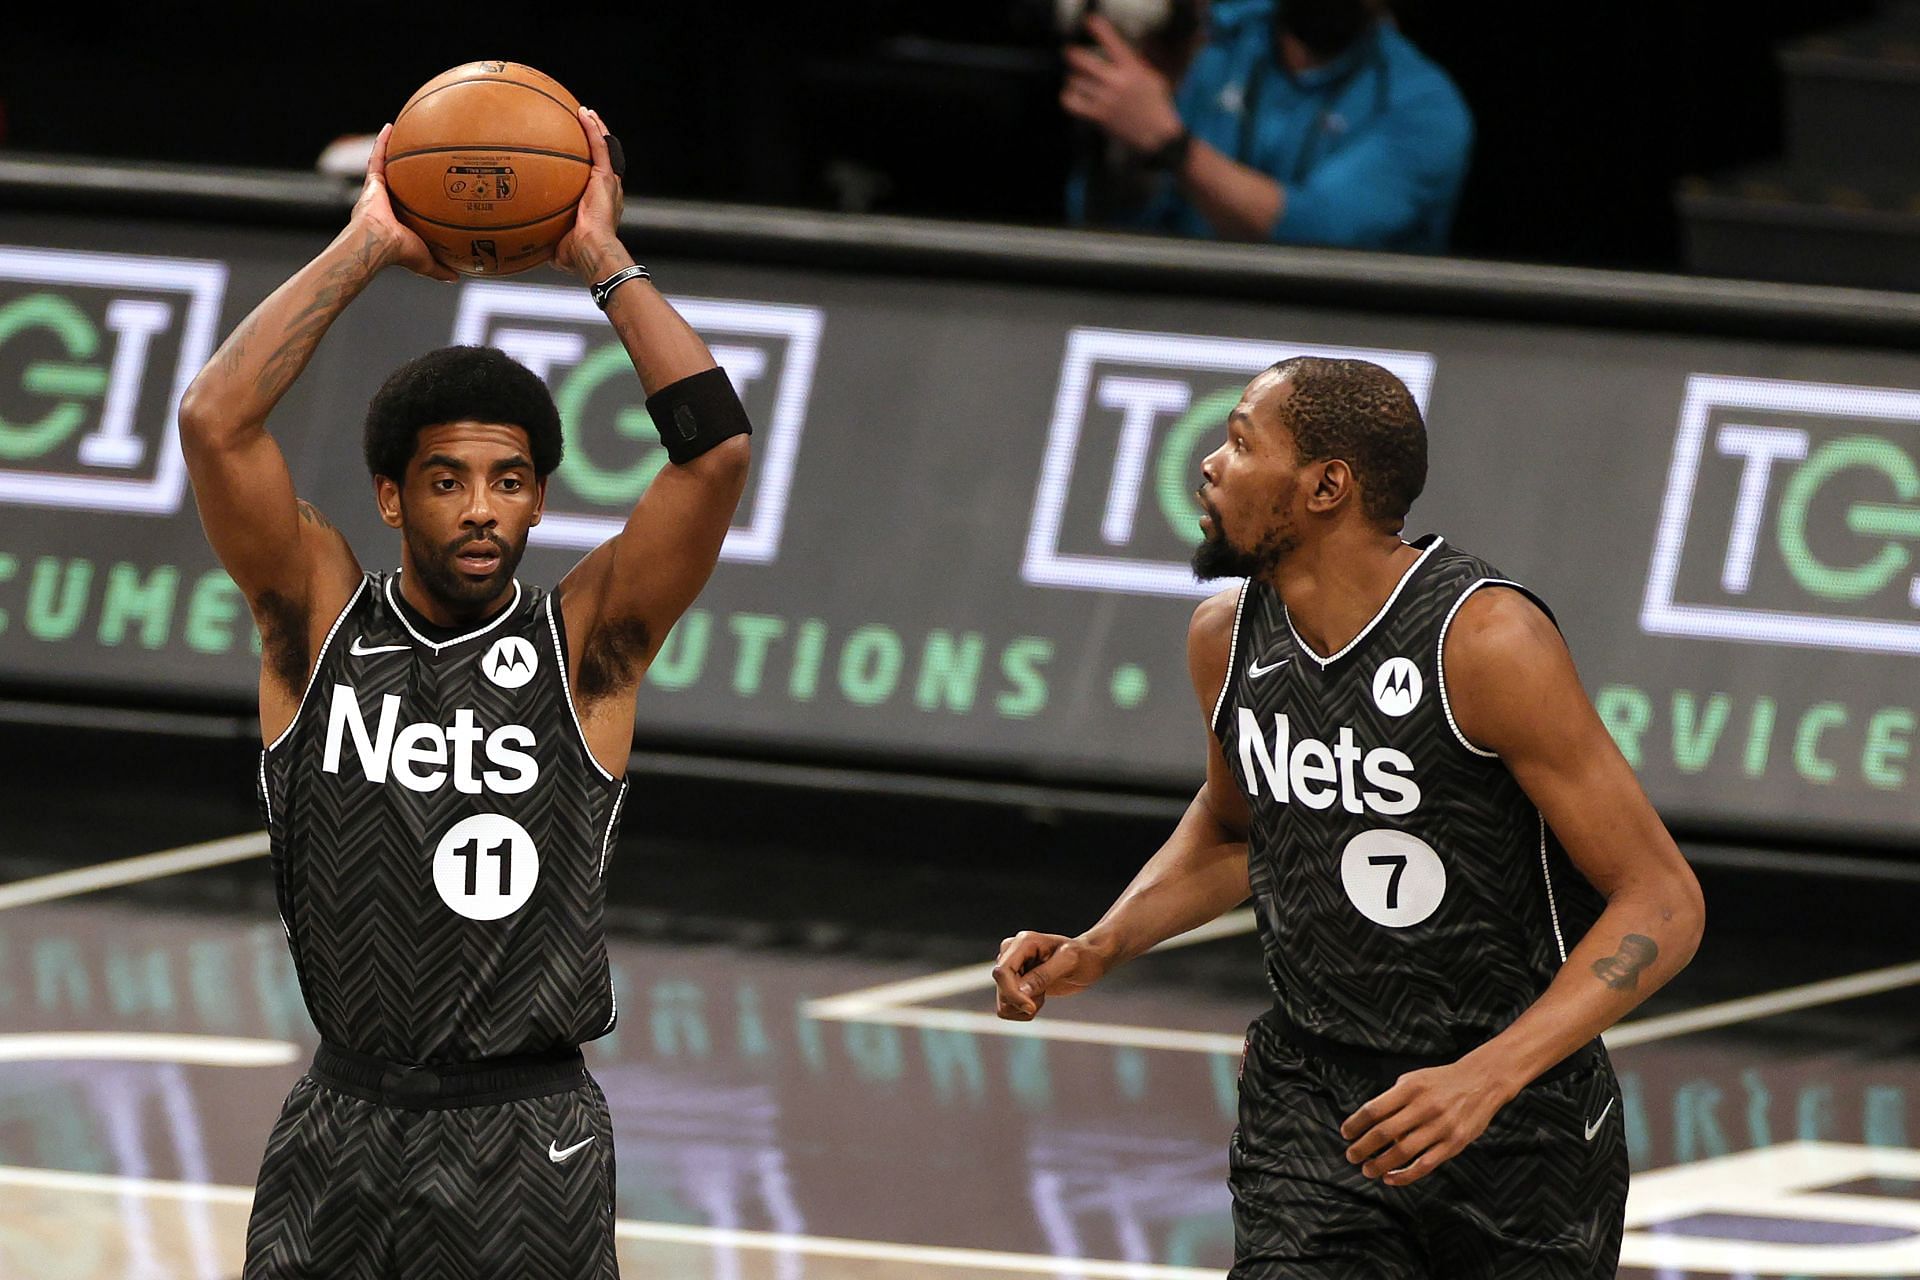 Kyrie Irving and Kevin Durant of the Brooklyn Nets in a game against the Charlotte Hornets last season